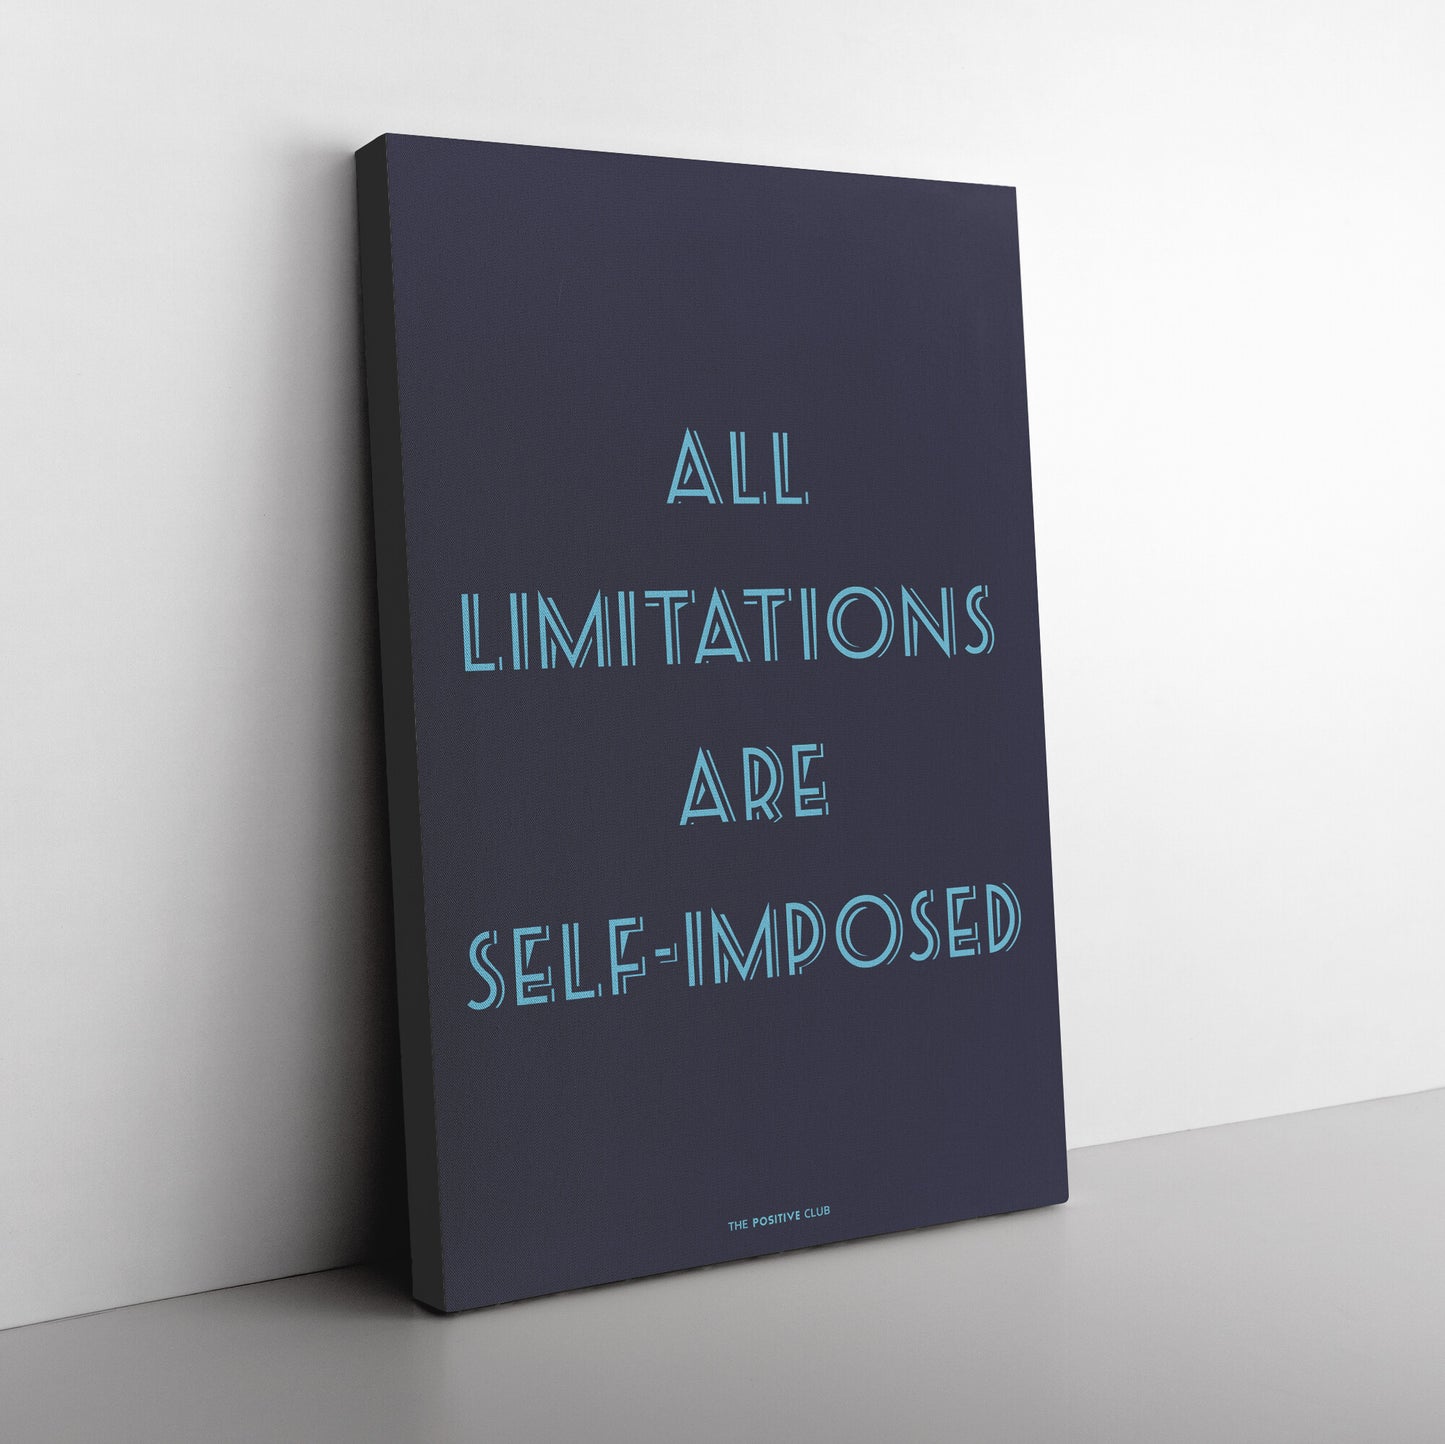 ALL LIMITATIONS ARE SELF-IMPOSED